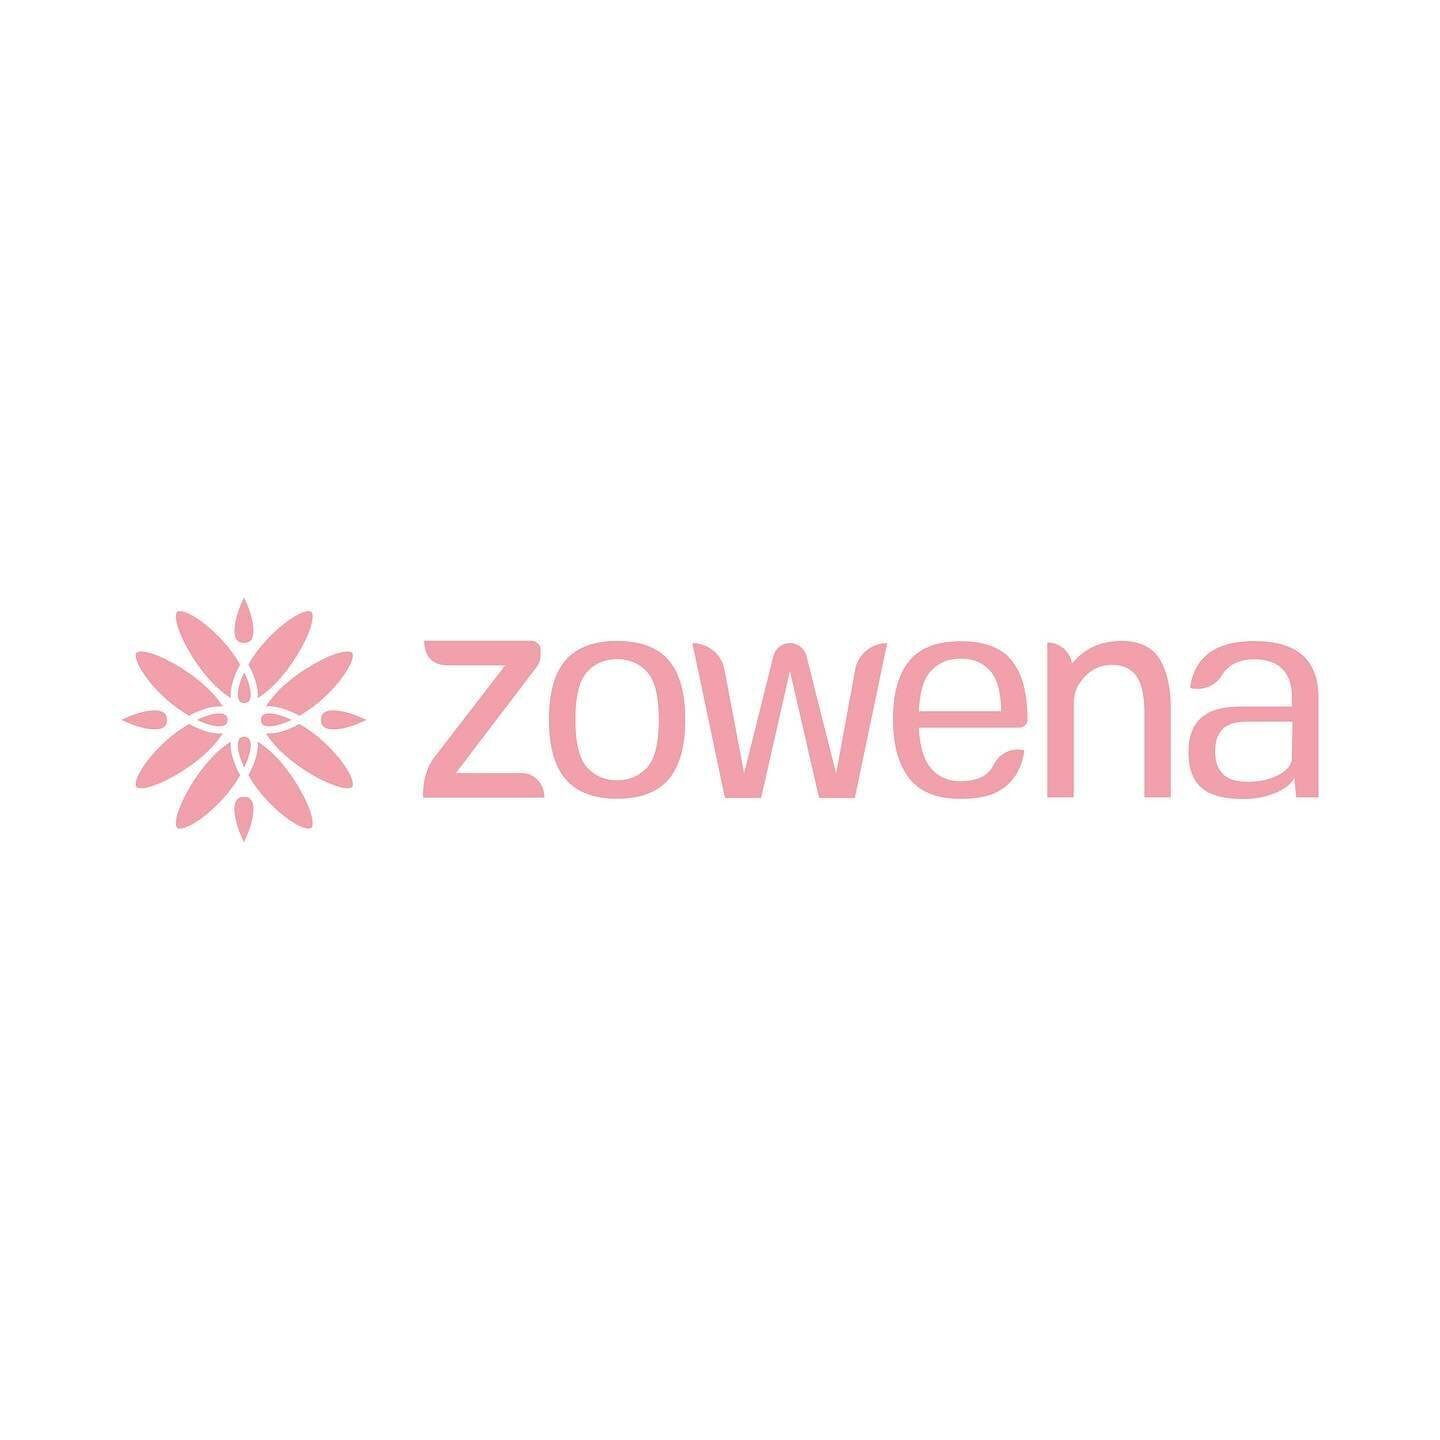 Zowena Skincare, a new entrant in the skincare market, sought a distinctive brand identity and packaging that reflected their plant-based, scientifically-driven products crafted in South Africa. The brand icon has a scientific yet floral aesthetic, f